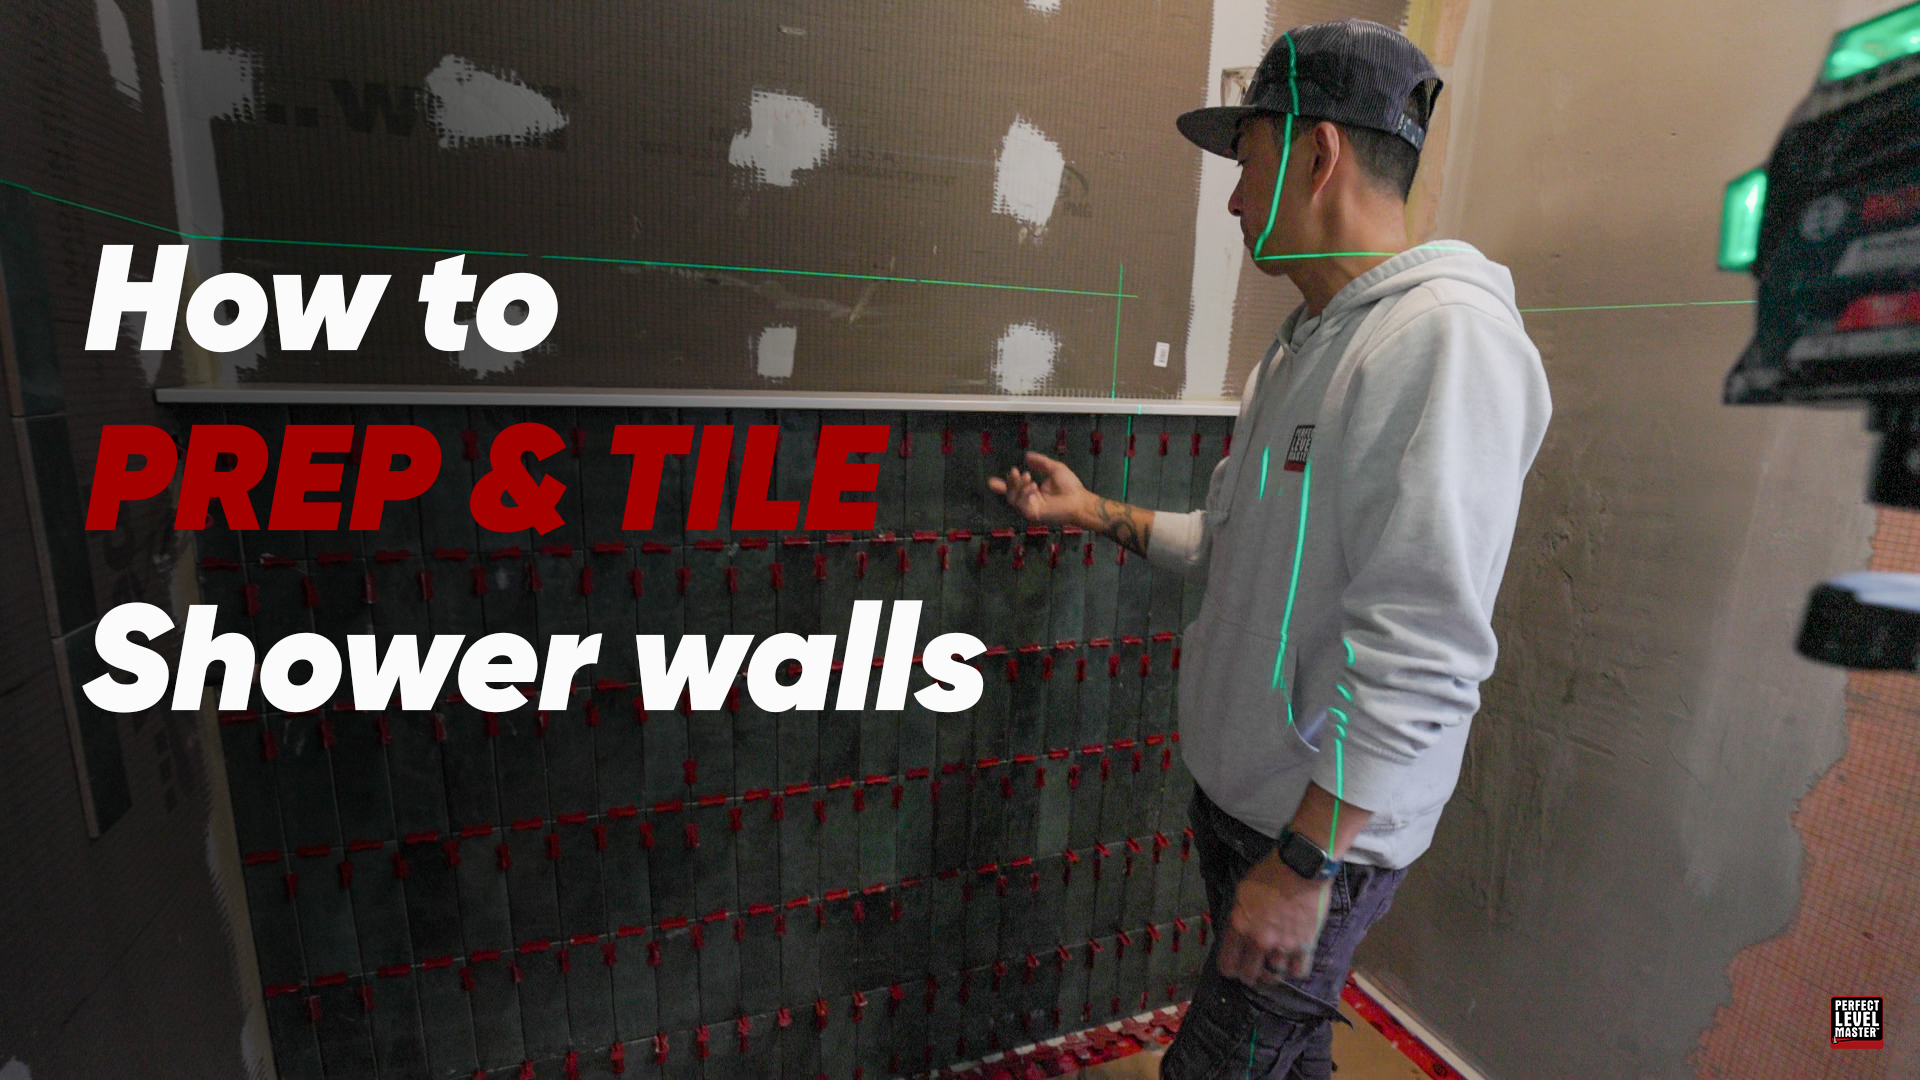 How to Prep & Tile Shower Walls